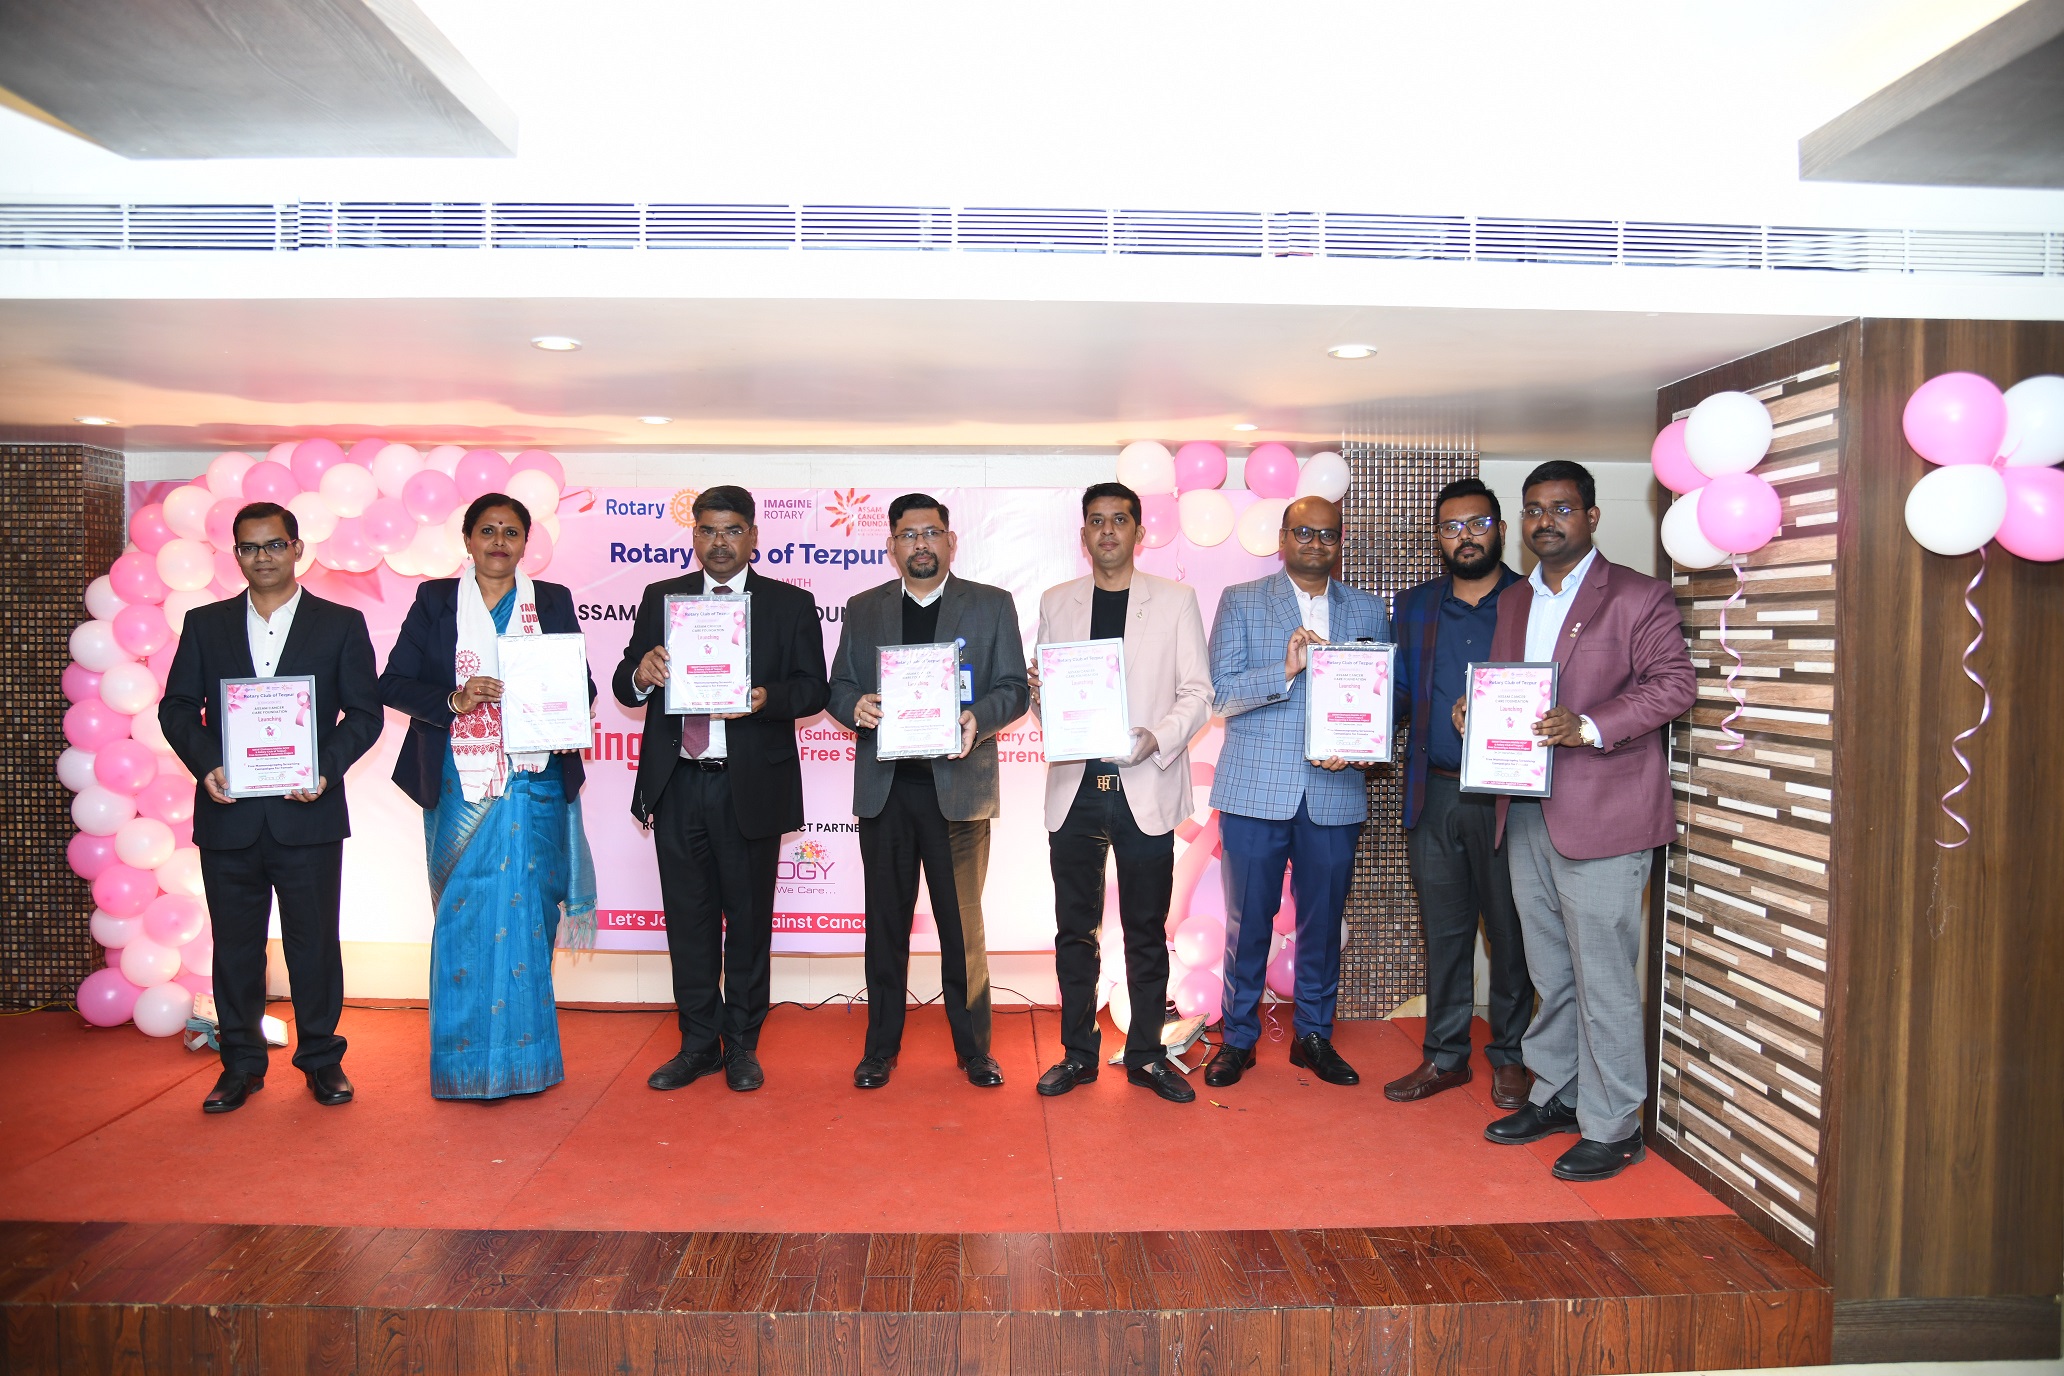 Launching of “Smart Pink” Project – Free Memmography Screening Campaigns for Female